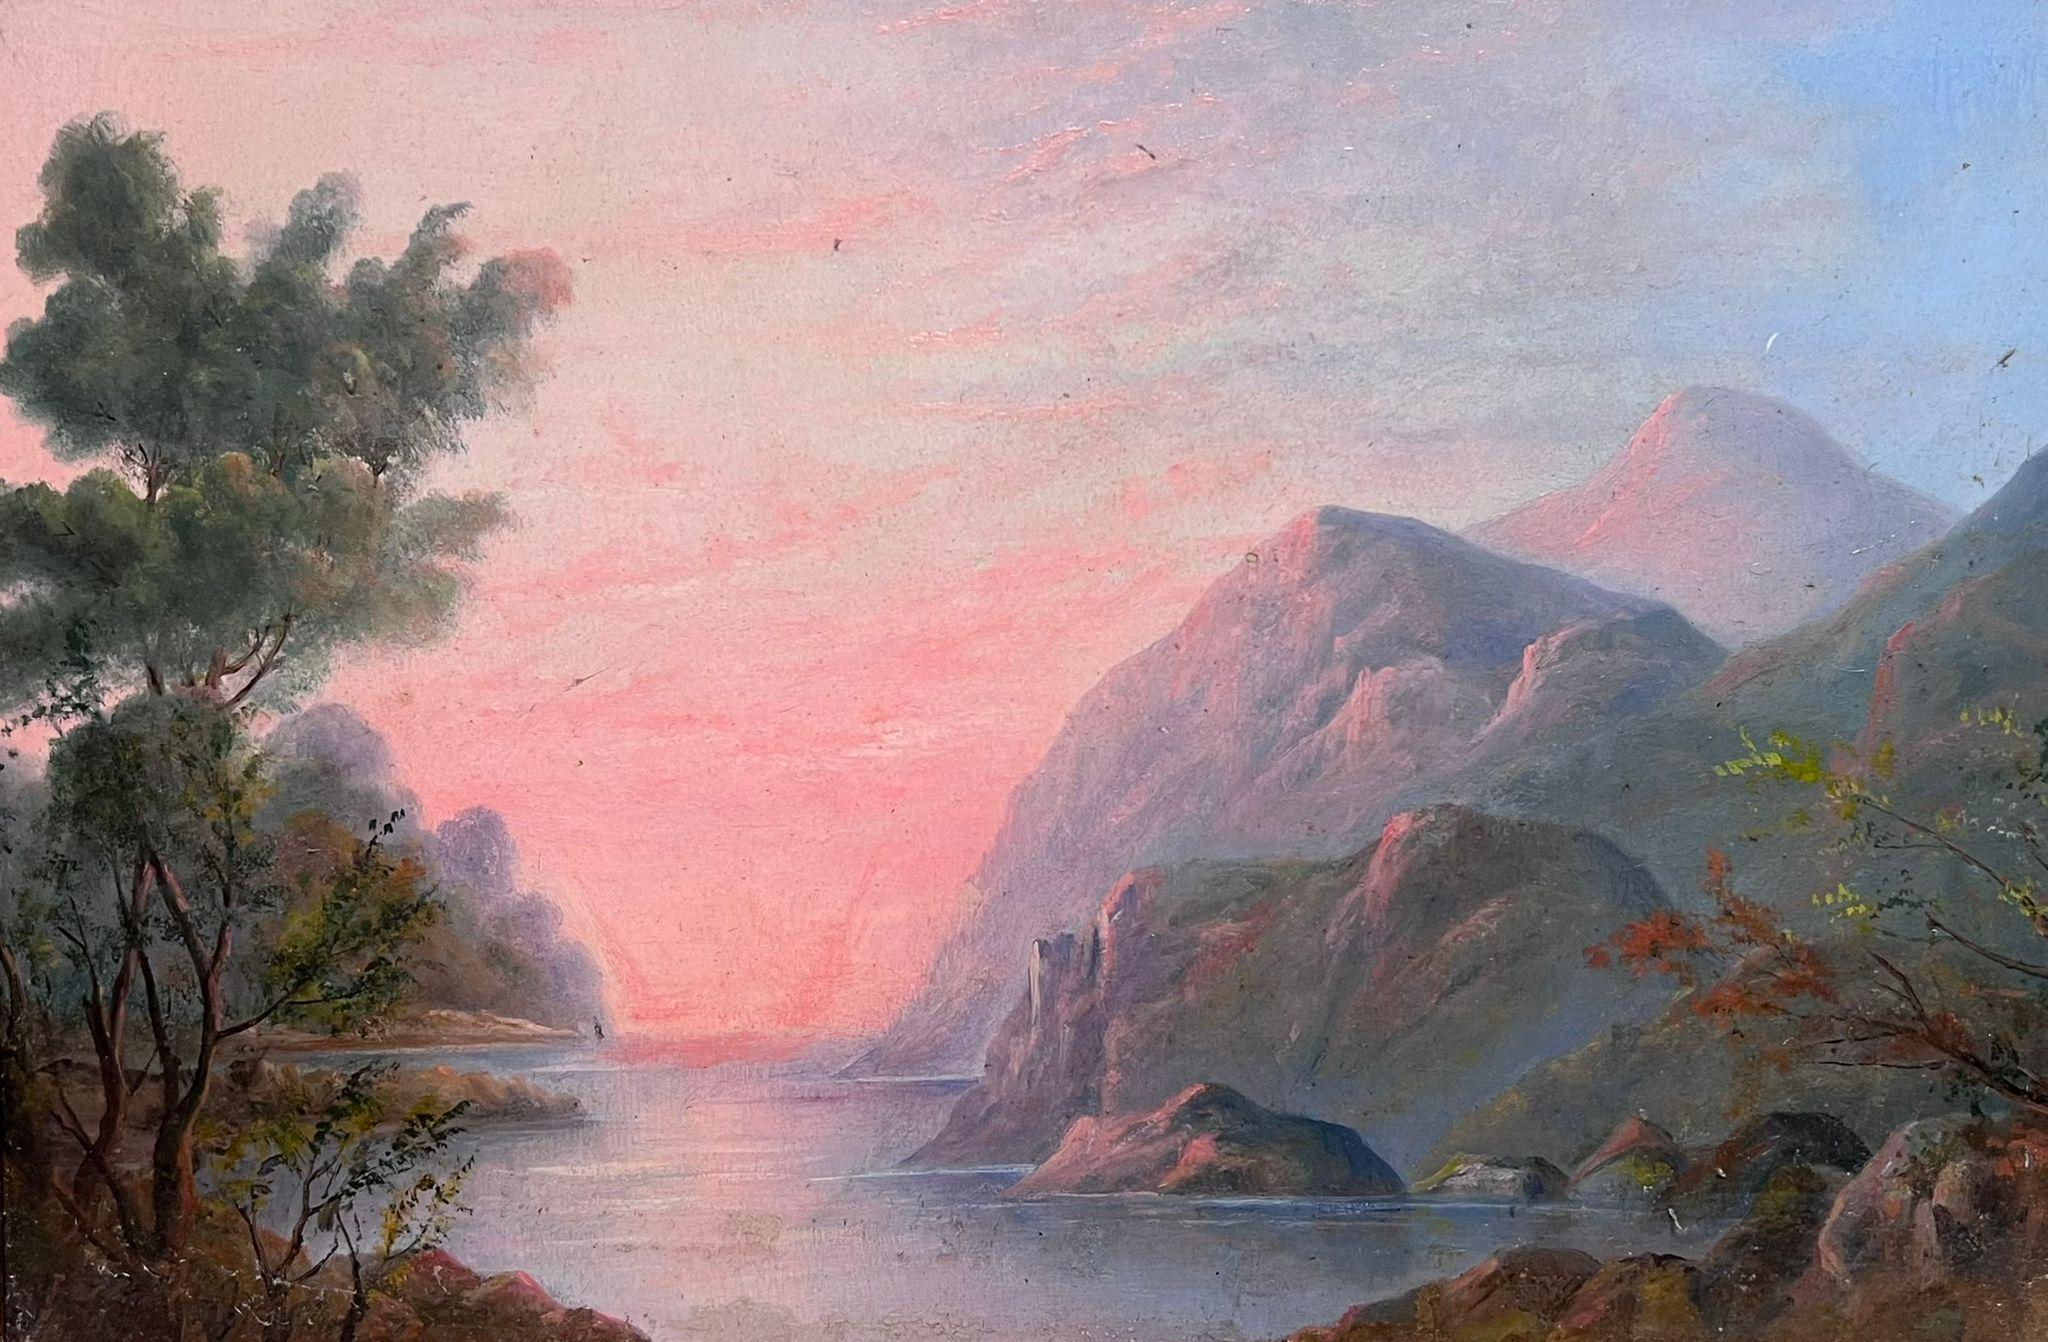 English Antique Oil  Landscape Painting - Mid 19th Century English Oil Painting Pink Sunset over Lake Landscape Hills